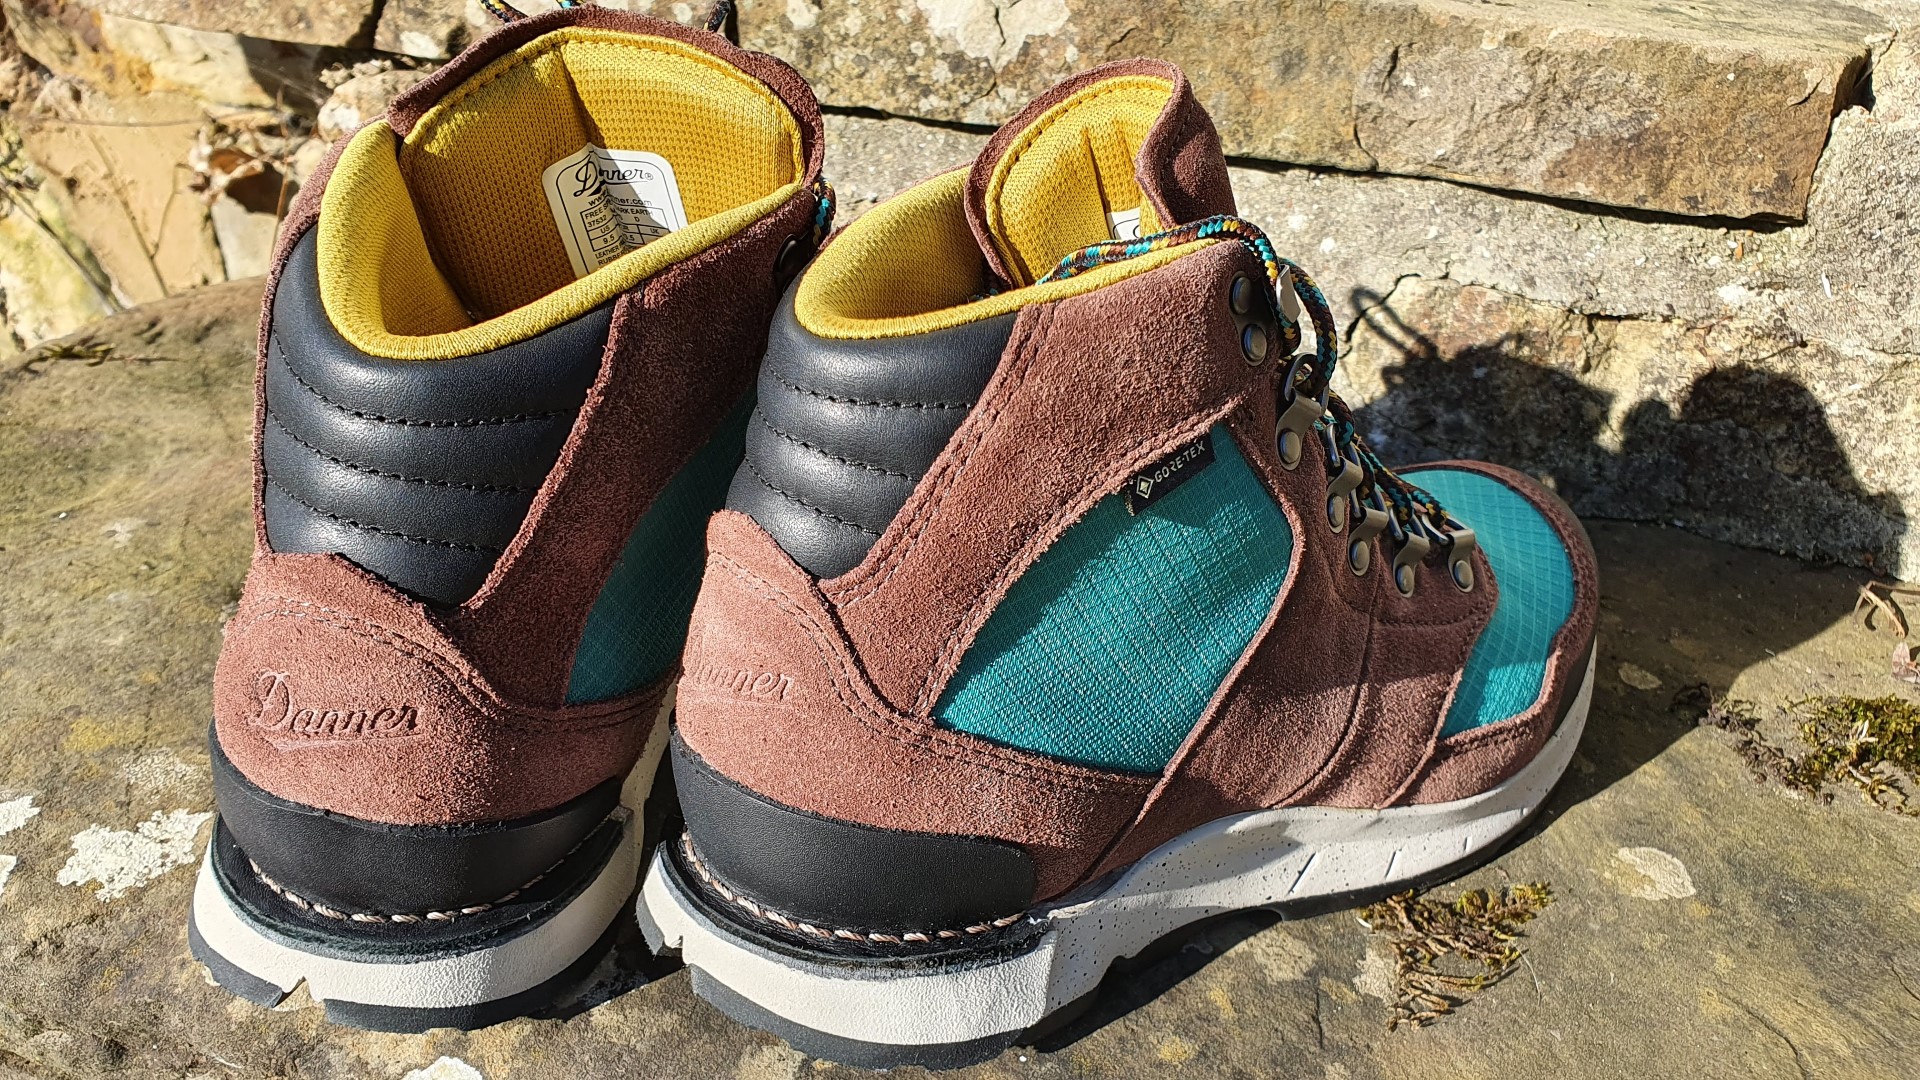 Danner Free Spirit walking boot review: retro cool and practicality ...